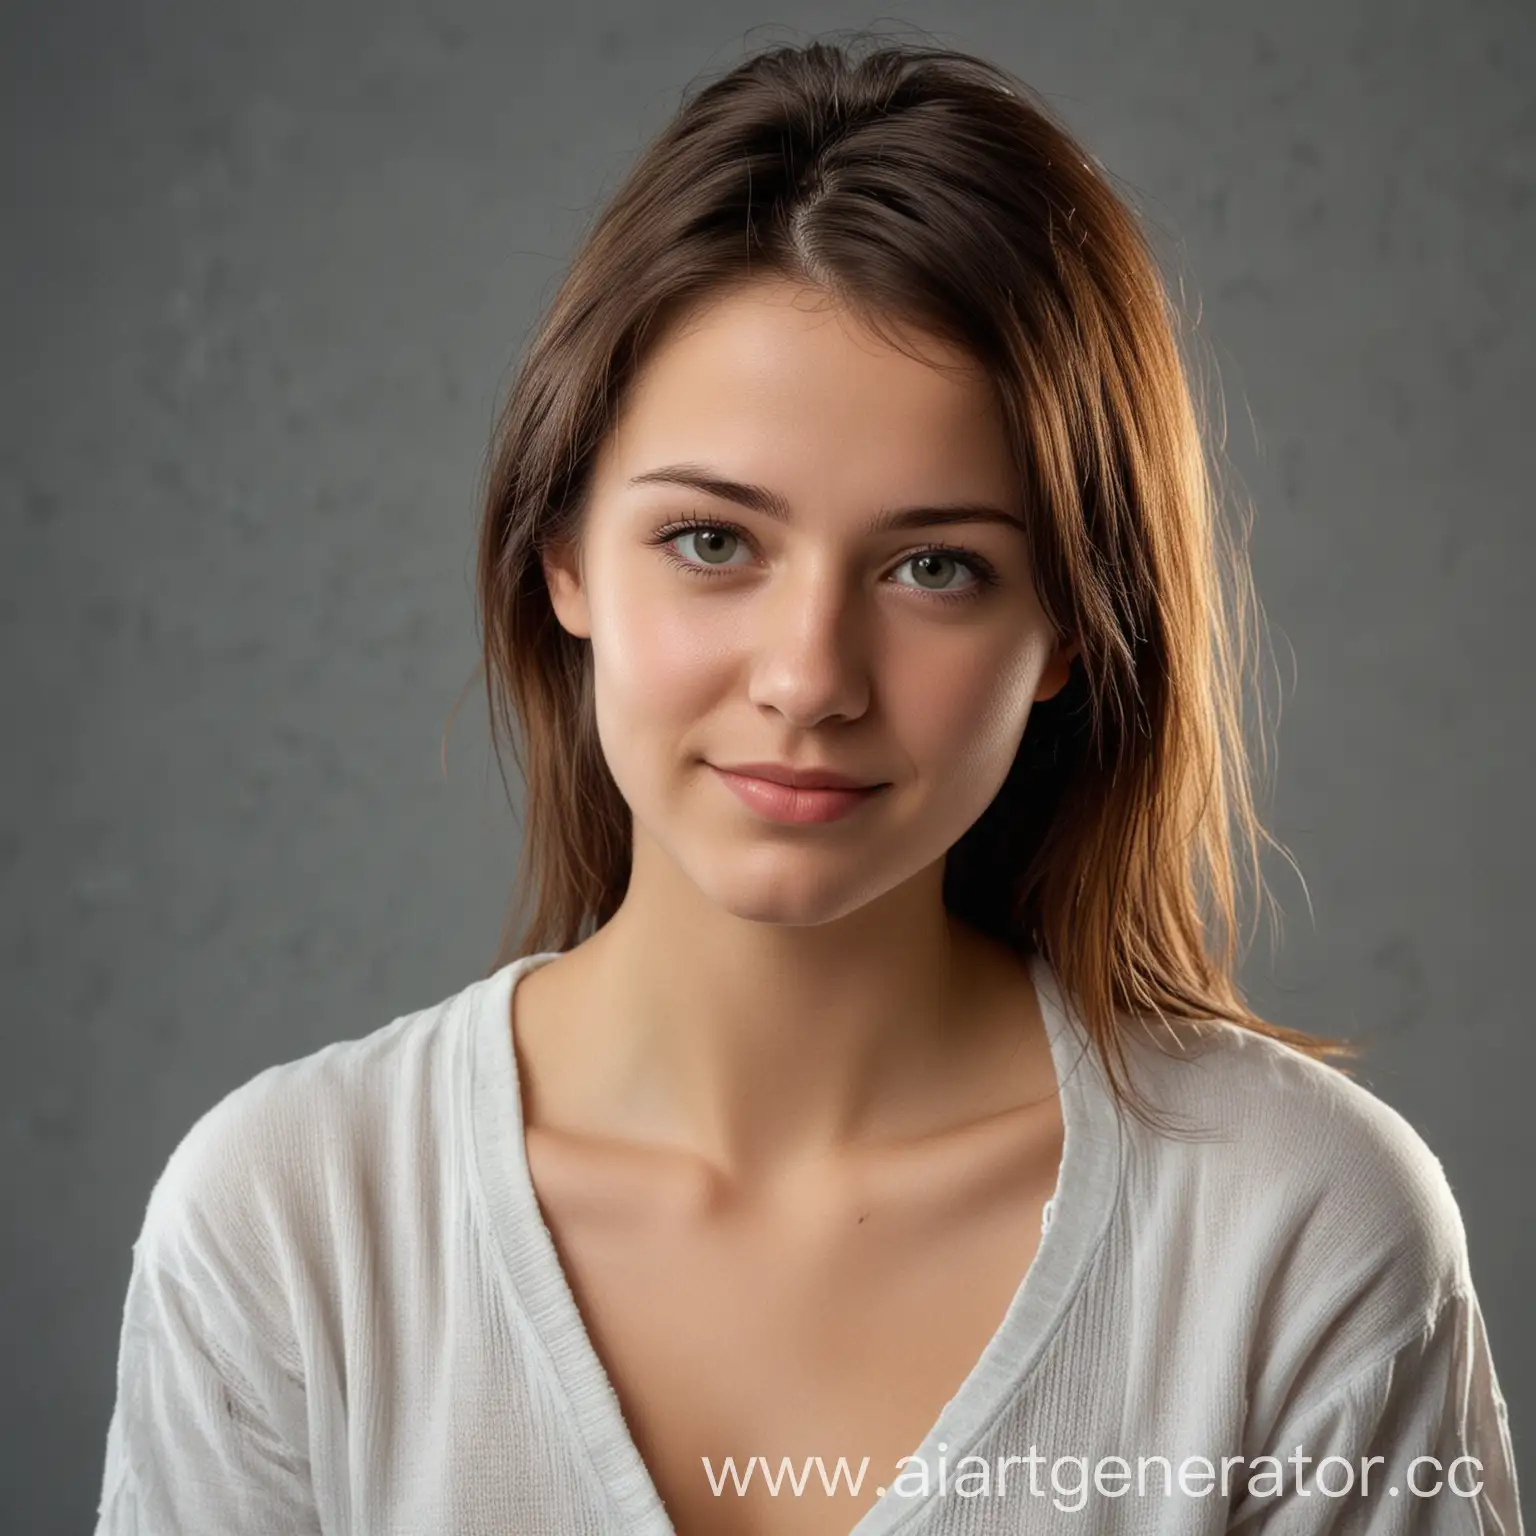 Girl, 25 years old, portrait